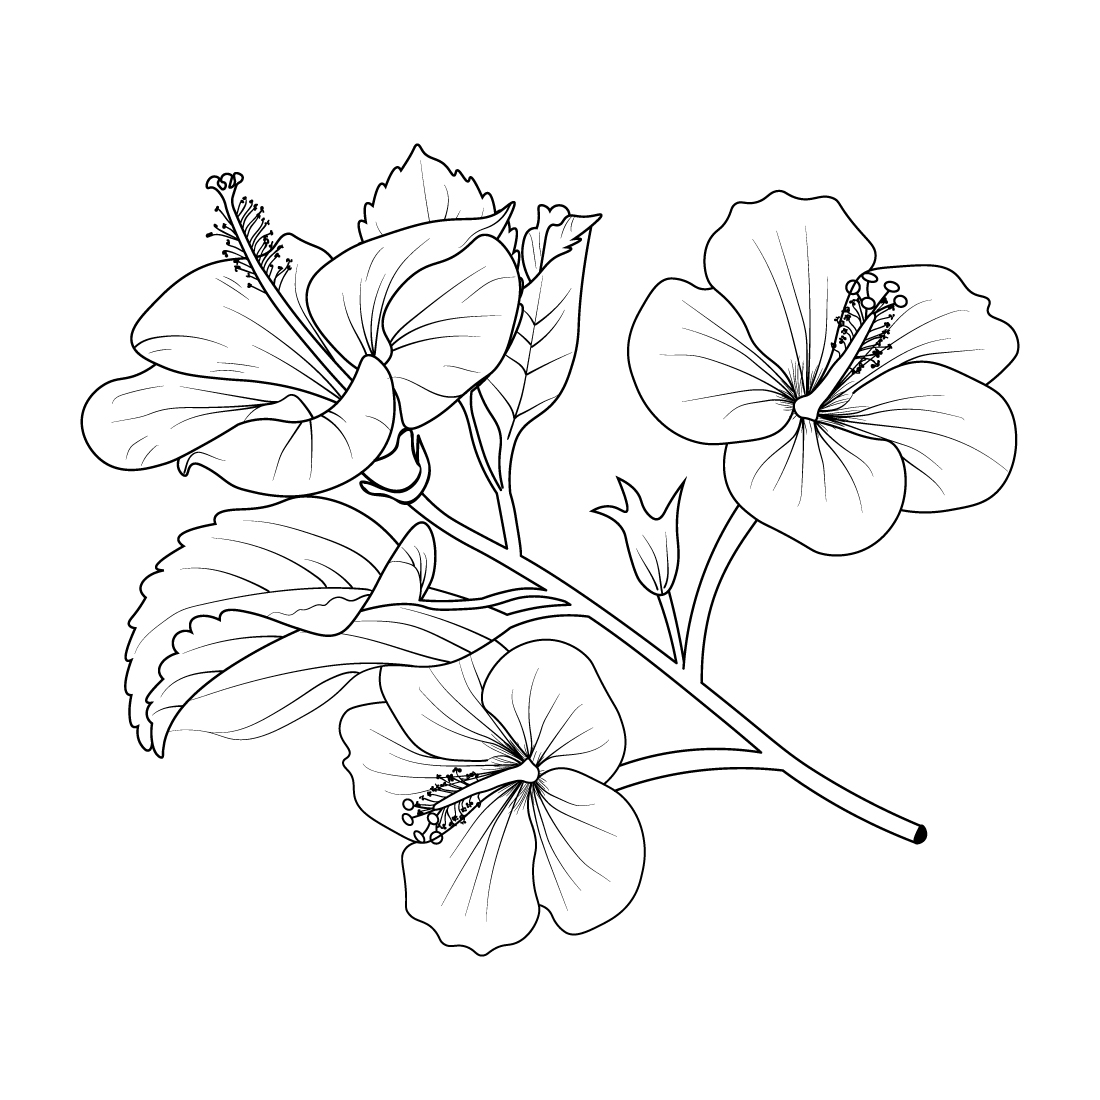 Hibiscus flowe drawing Hibiscus flower tattoo Hibiscus flower outline Hibiscus flower painting Hibiscus flower clipart cover image.